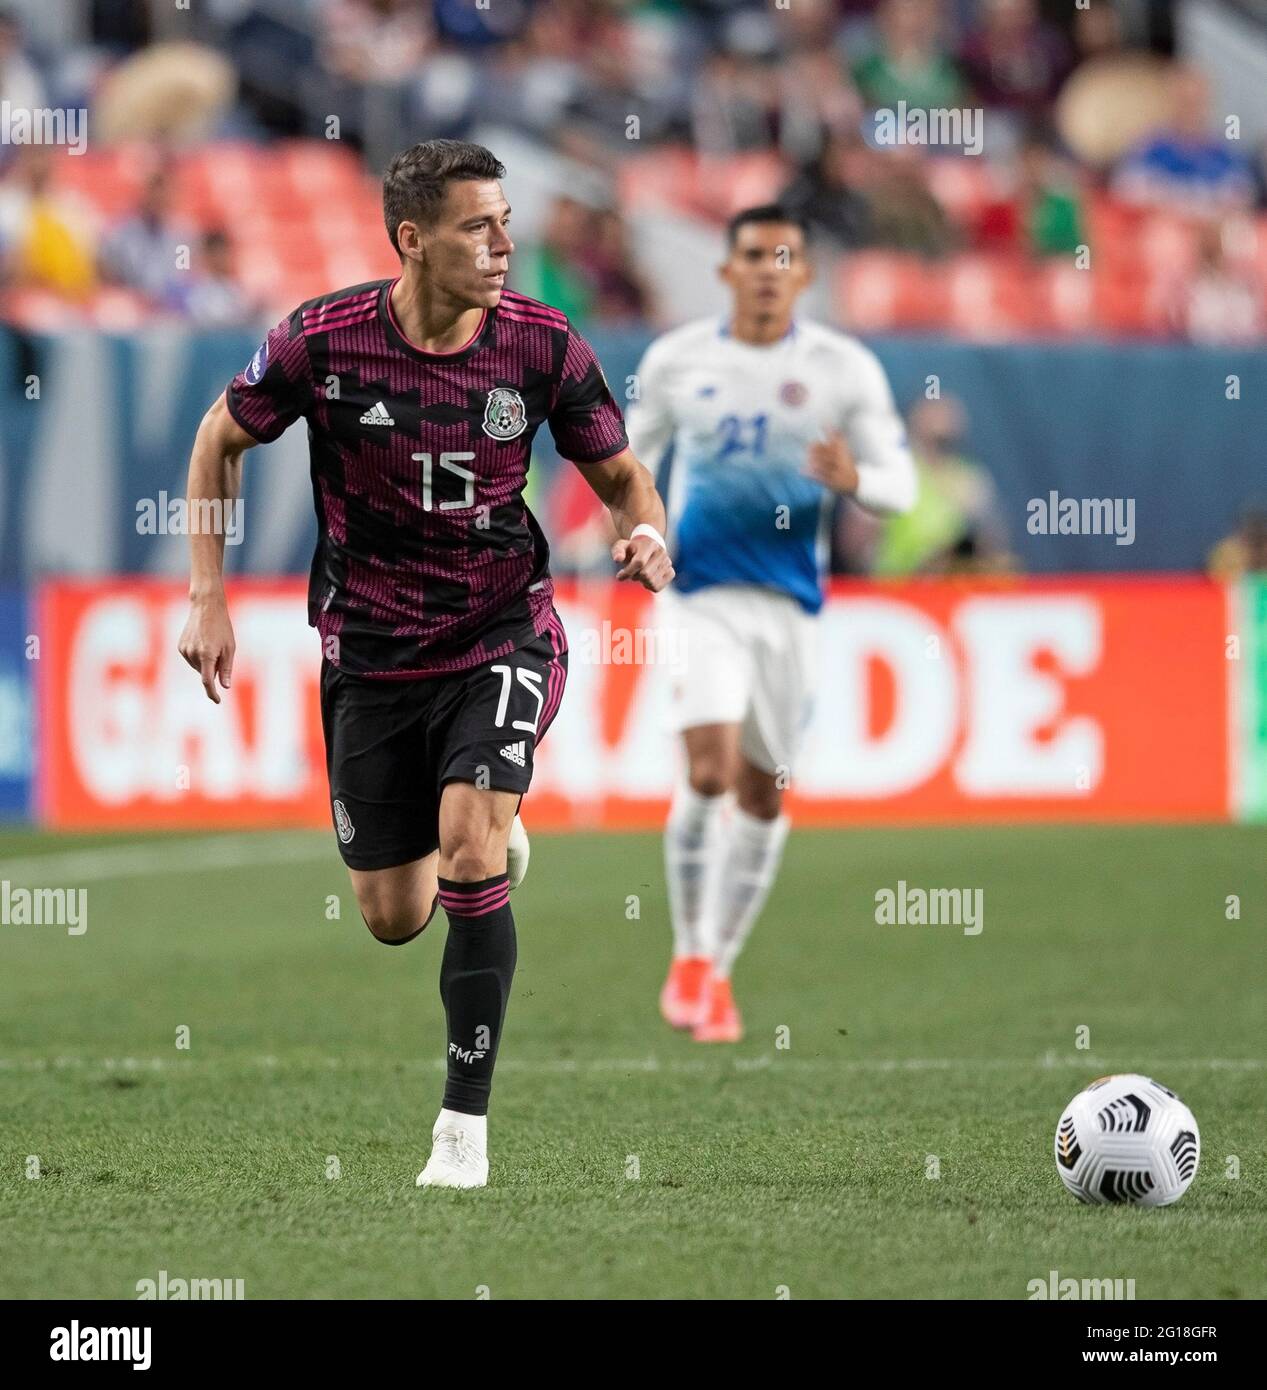 Denver, Colorado, USA. 3rd June, 2021. Mexico D HECTOR MORENO readies to receive a pass during the 1st. Half. Mexico beats Costa Rica 1-0 in Penalty Kicks Wed. Night at Empower Field at Mile High. Credit: Hector Acevedo/ZUMA Wire/Alamy Live News Stock Photo